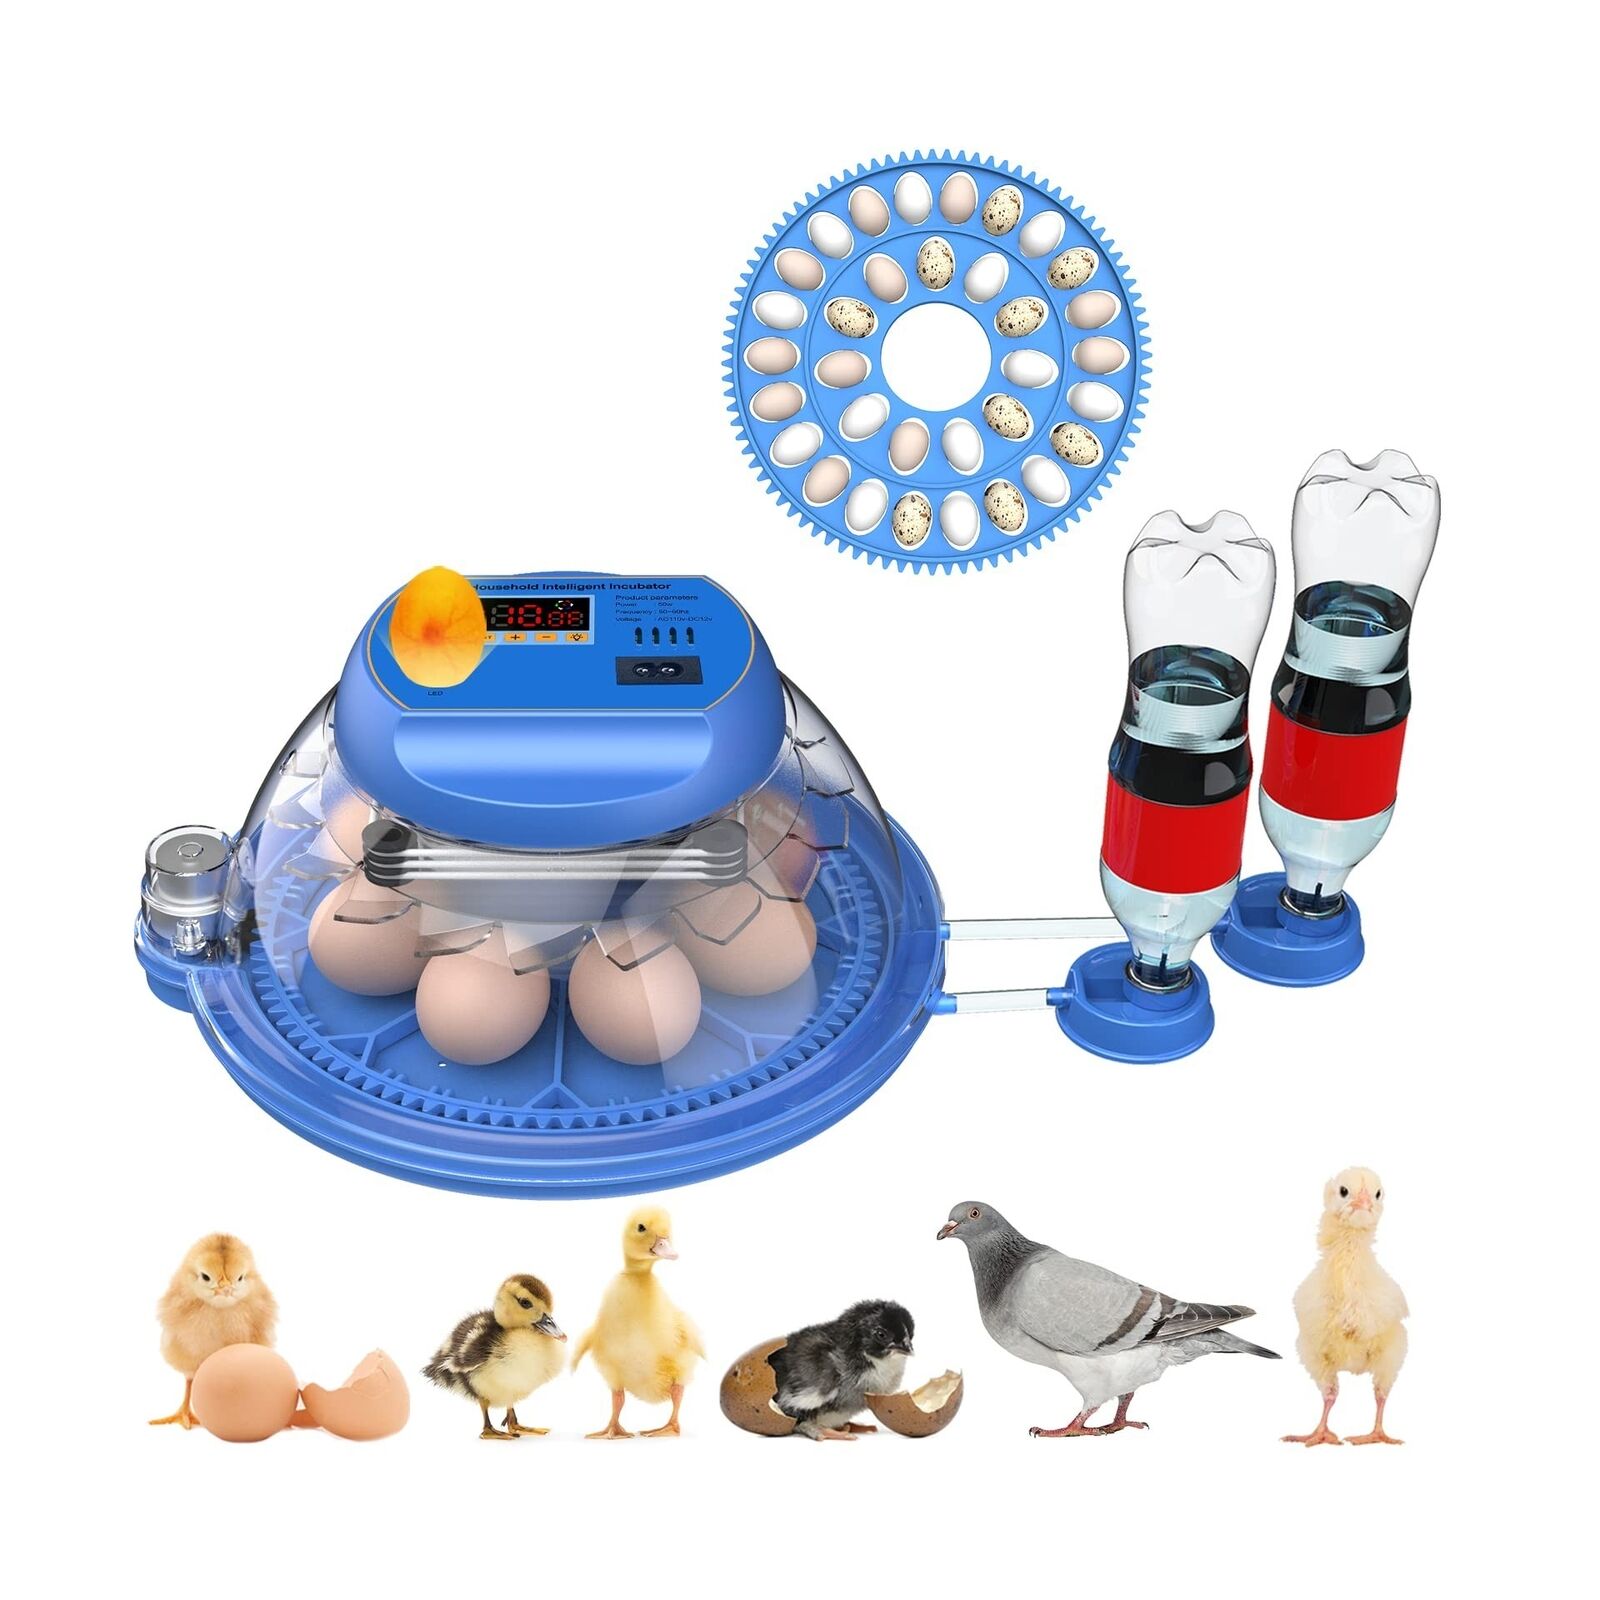 8-33 Eggs Incubator for Hatching Eggs, Double Egg Chicken Duck Goose Pigeon Q...